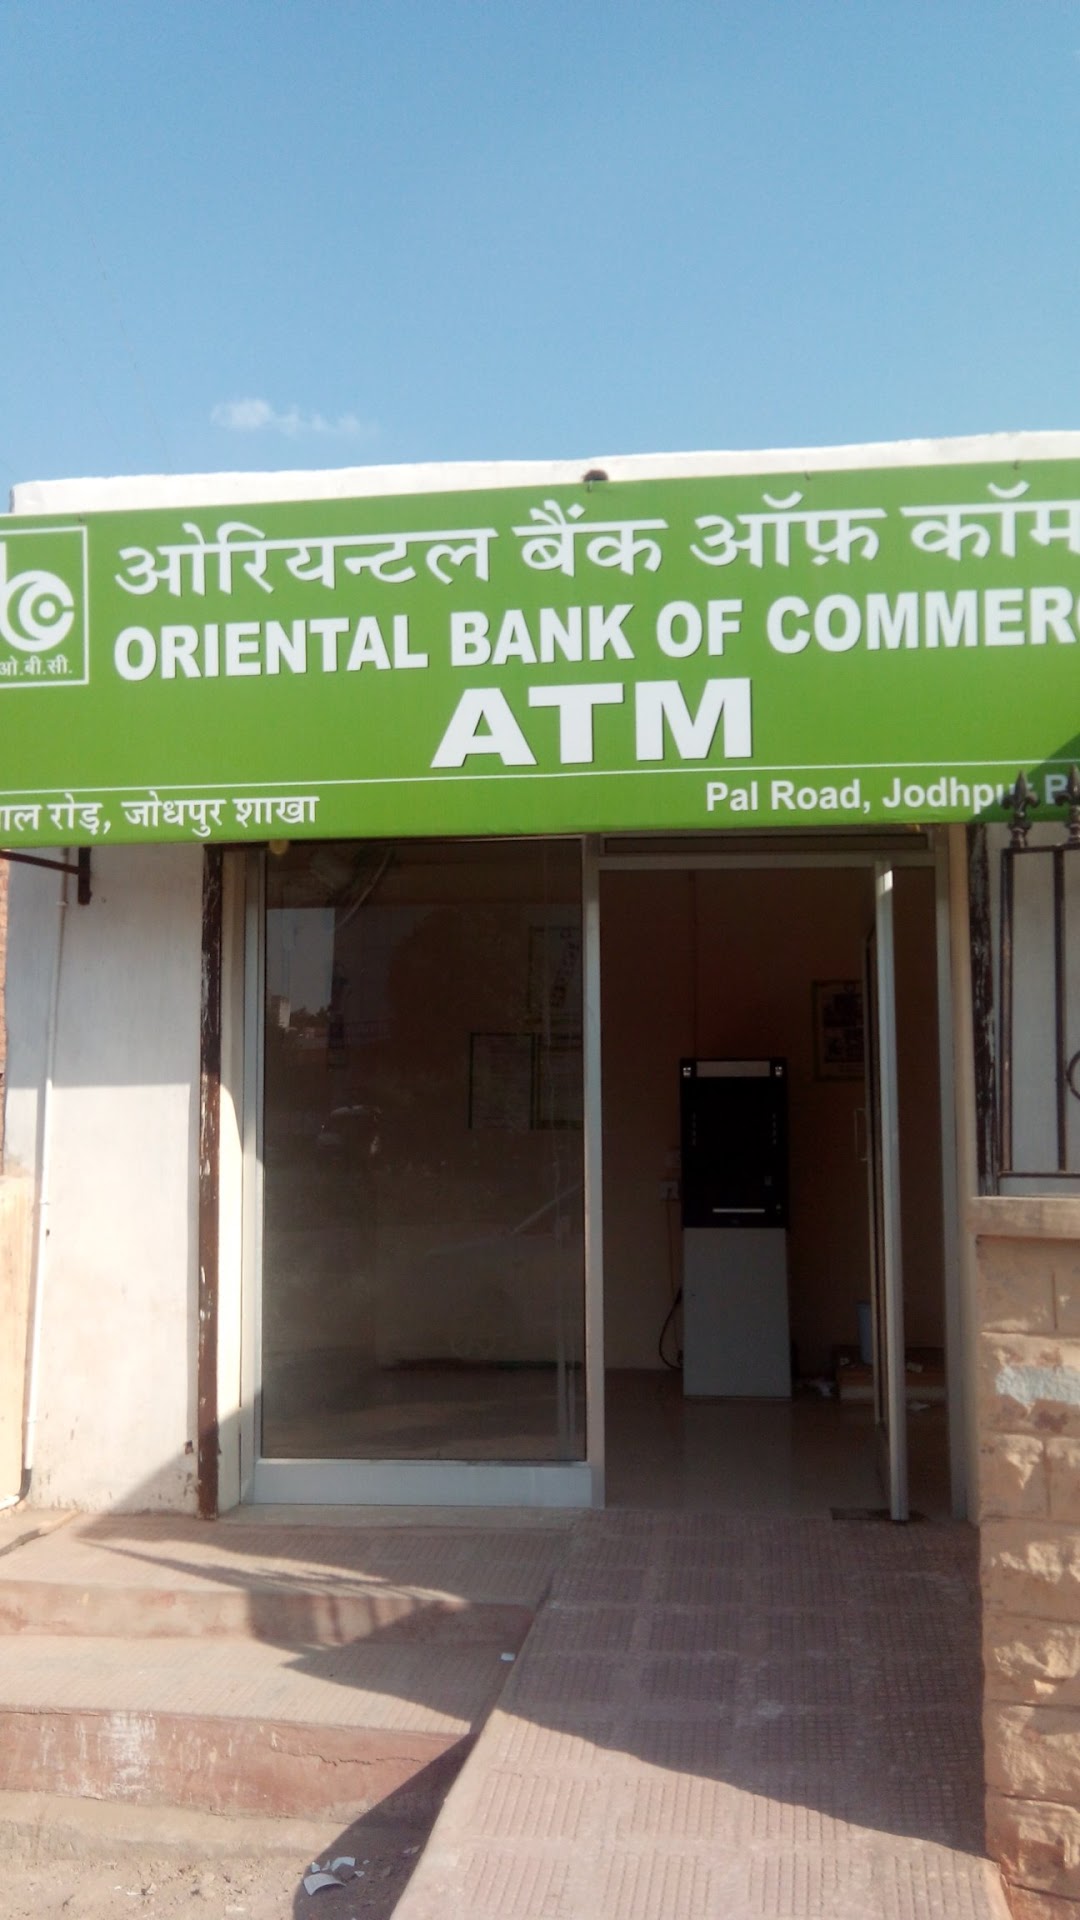 Oriental Bank Of Commerce ATM - Pal Road